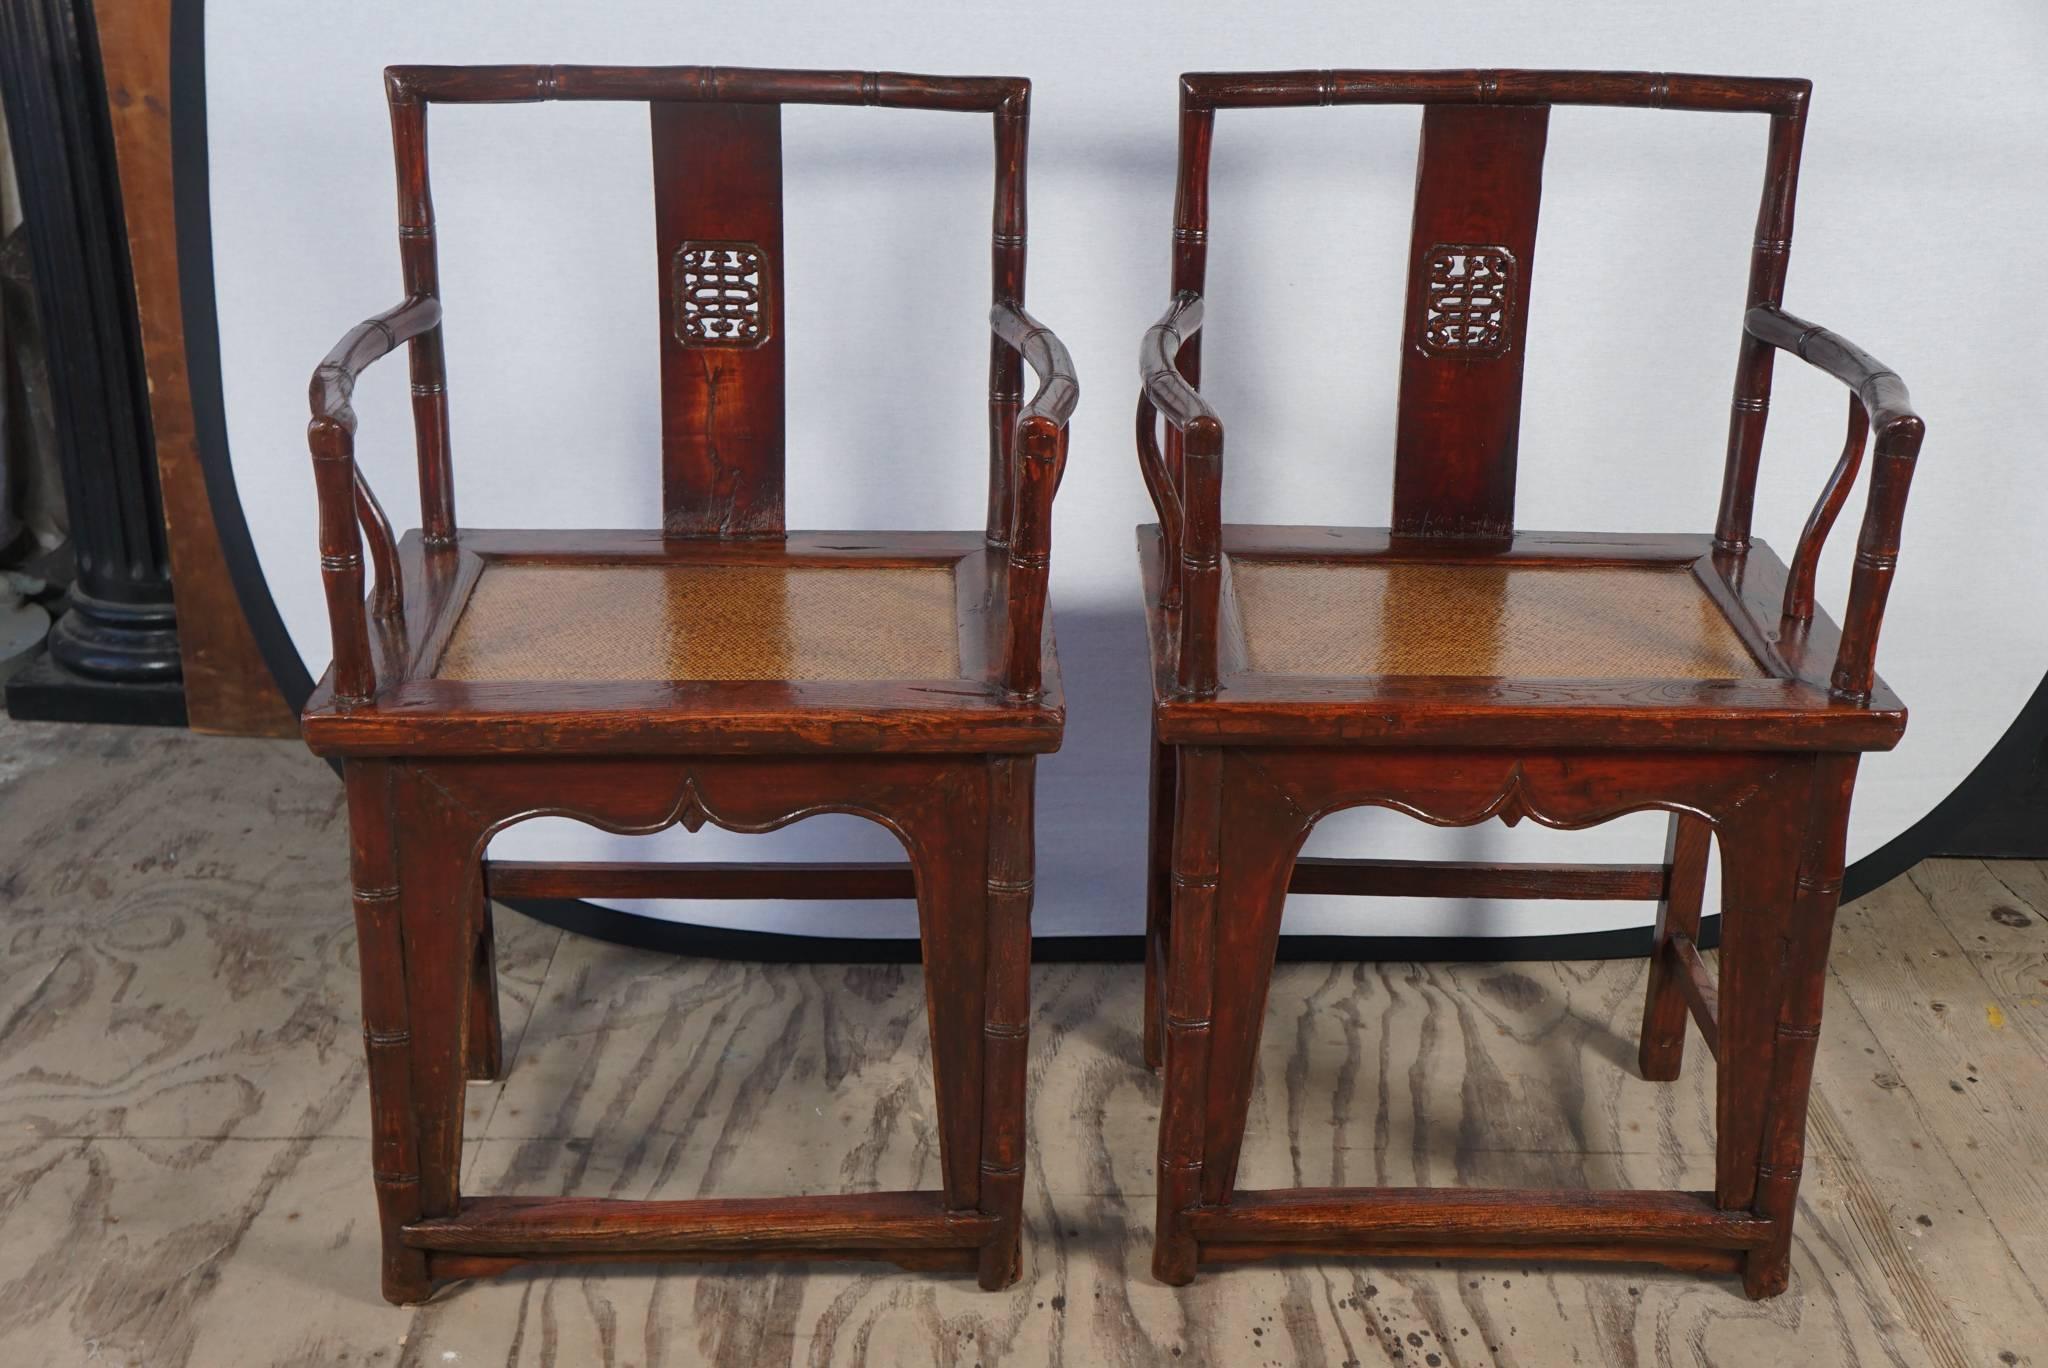 These chairs from circa 1840 are well made and retain the original split cane woven inset seat mats. The wood is finished in a deep rich red transparent lacquer giving the wood a lustrous finish . They are generous in scale and comfortable and